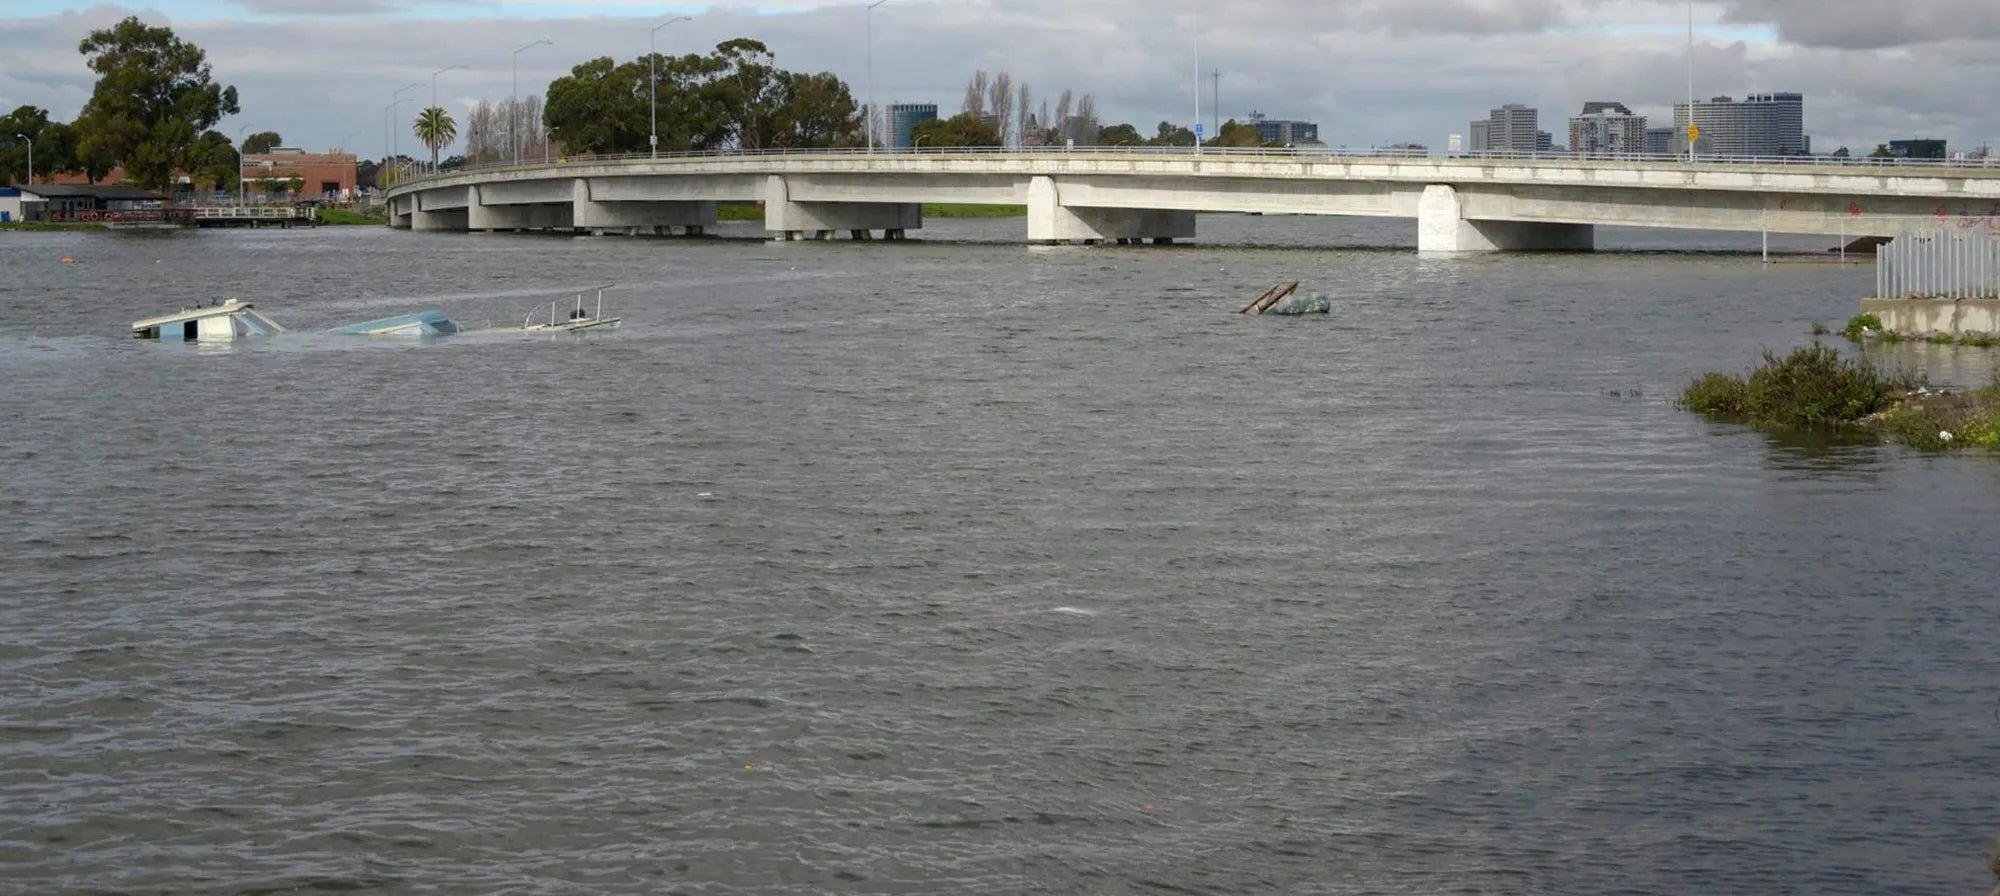 King tide at Coast Guard Island in Oakland. A boat sits sinking below the water, and the water level reaches nearly the underside of the bridge.